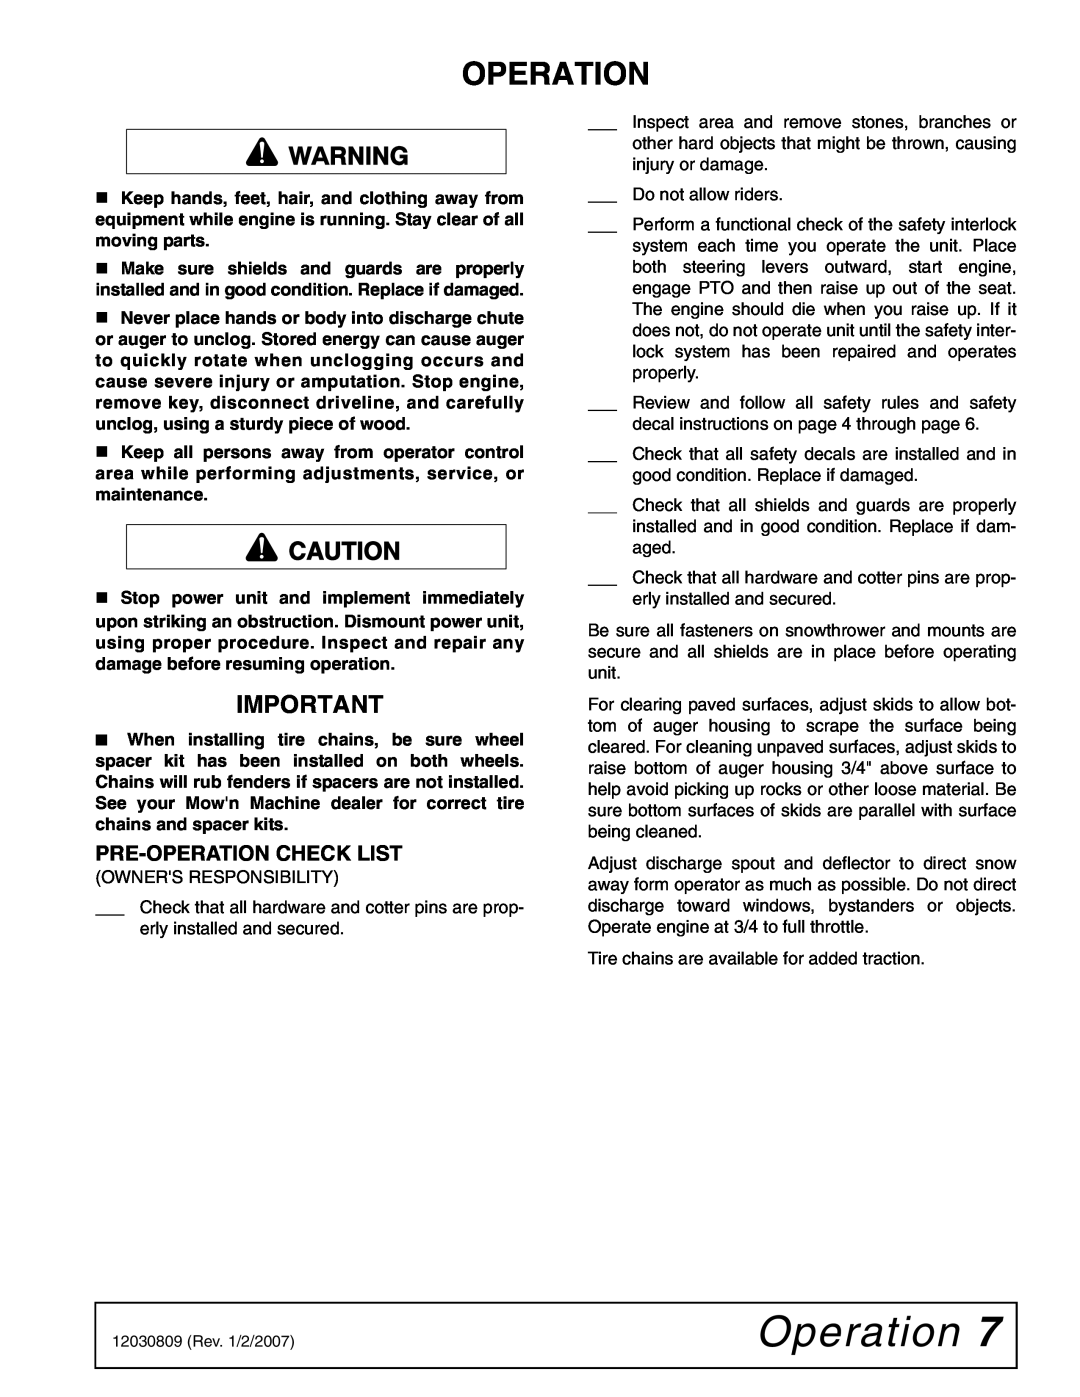 Woods Equipment ST500 manual Pre-Operation Check List 